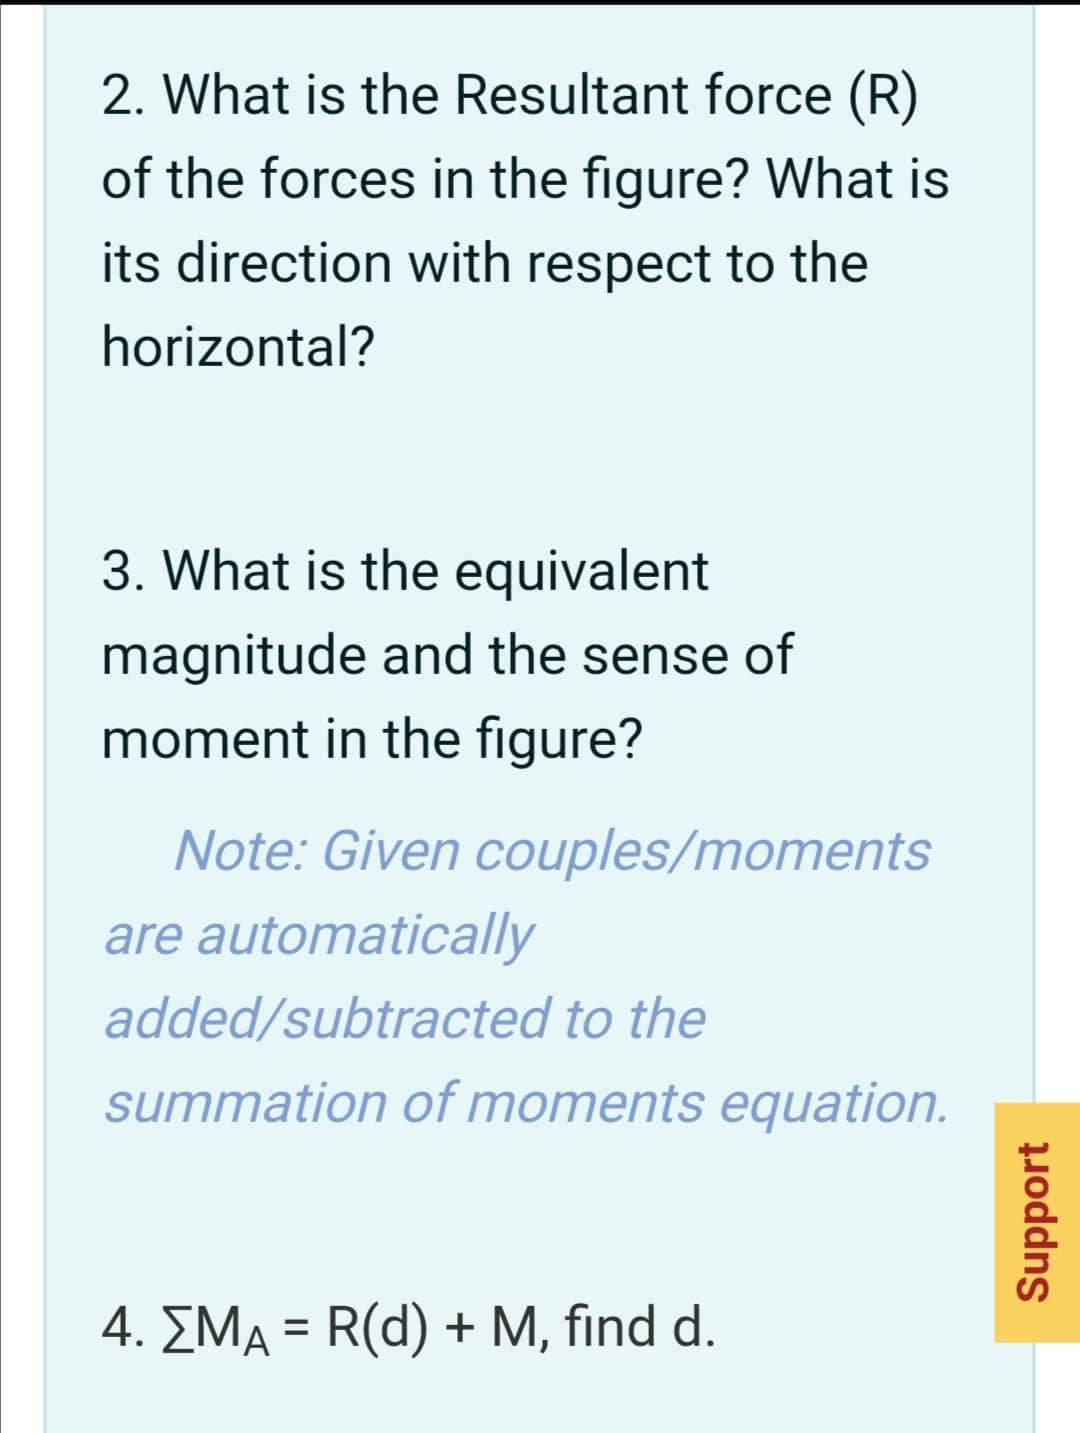 2. What is the Resultant force (R)
of the forces in the figure? What is
its direction with respect to the
horizontal?
3. What is the equivalent
magnitude and the sense of
moment in the figure?
Note: Given couples/moments
are automatically
added/subtracted to the
summation of moments equation.
4. EMA = R(d) + M, find d.
%3D
Support
